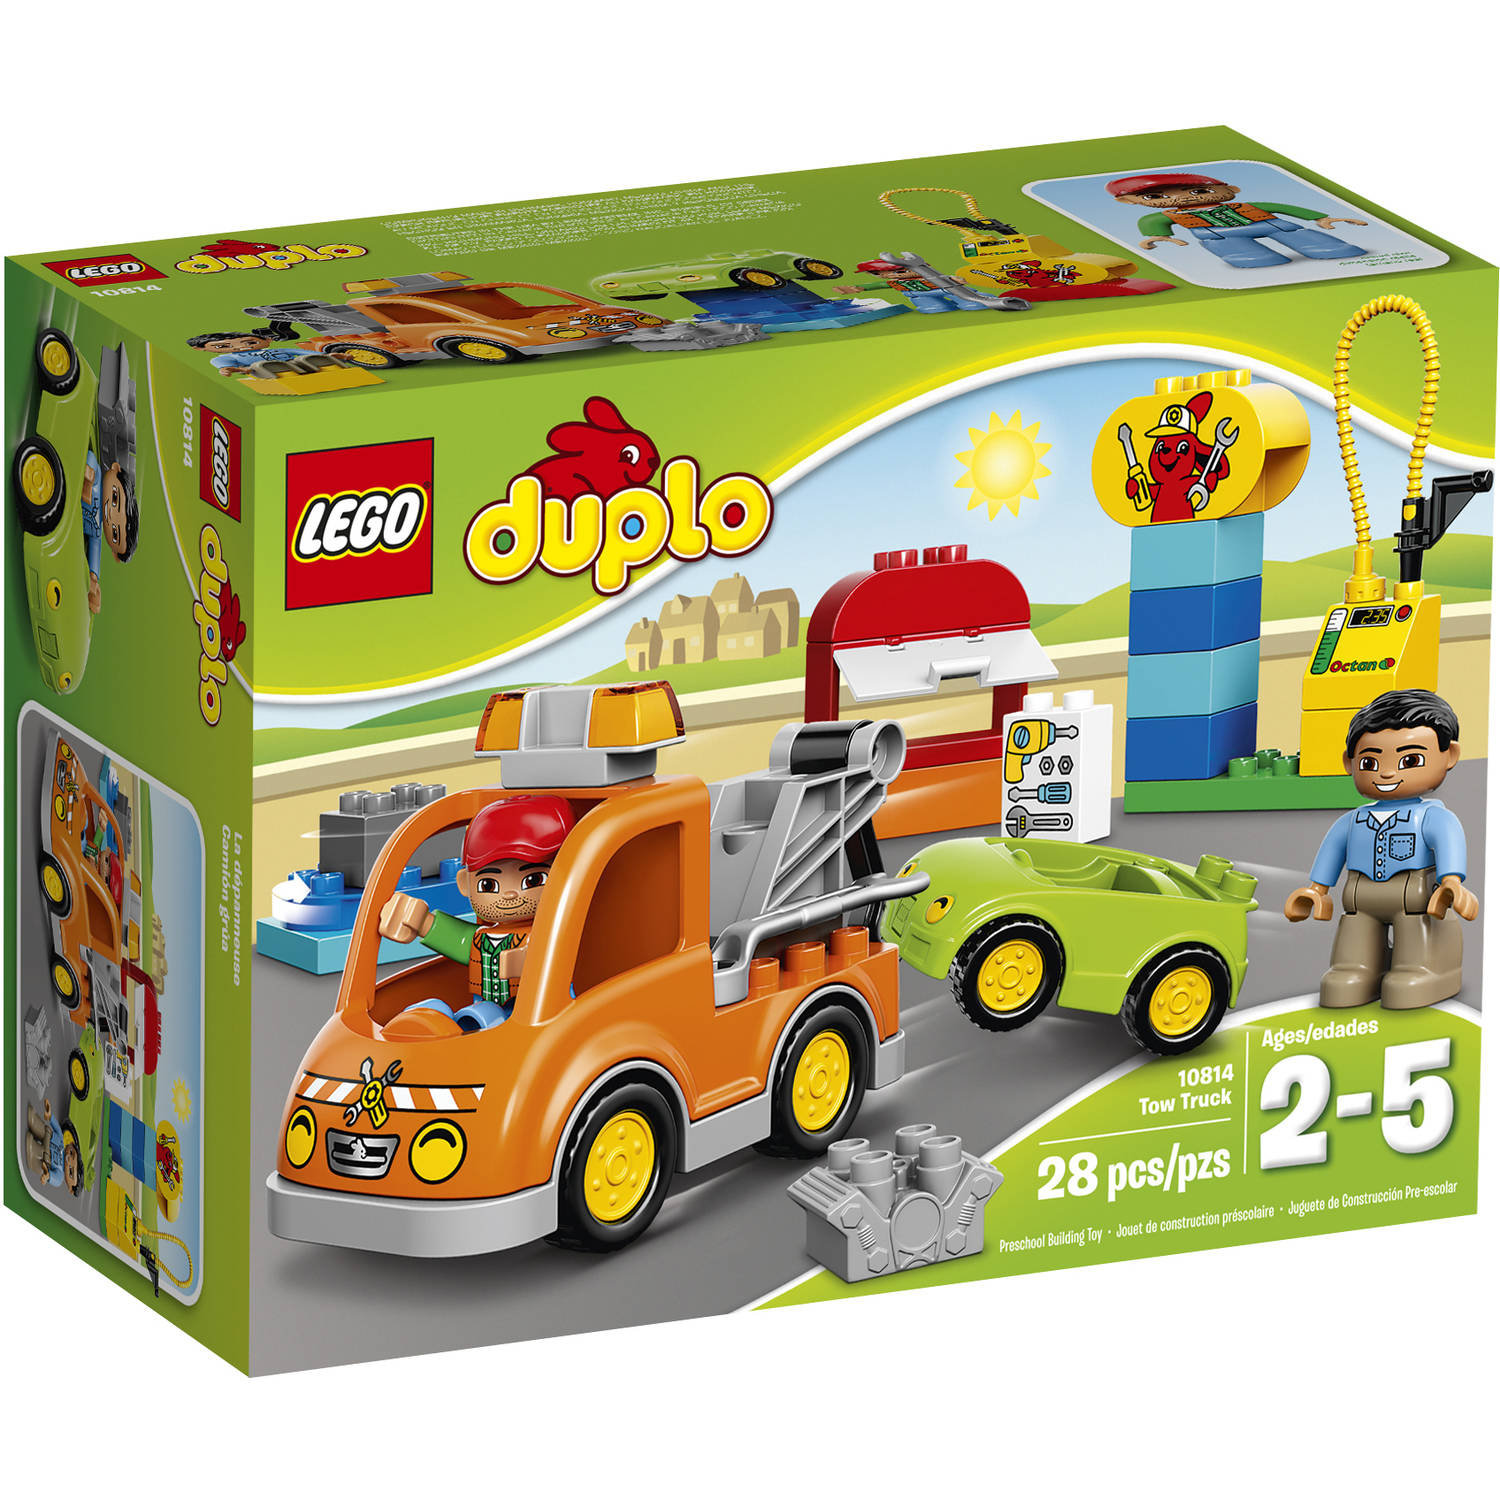 LEGO DUPLO Town Tow Truck, 10814 - image 1 of 6